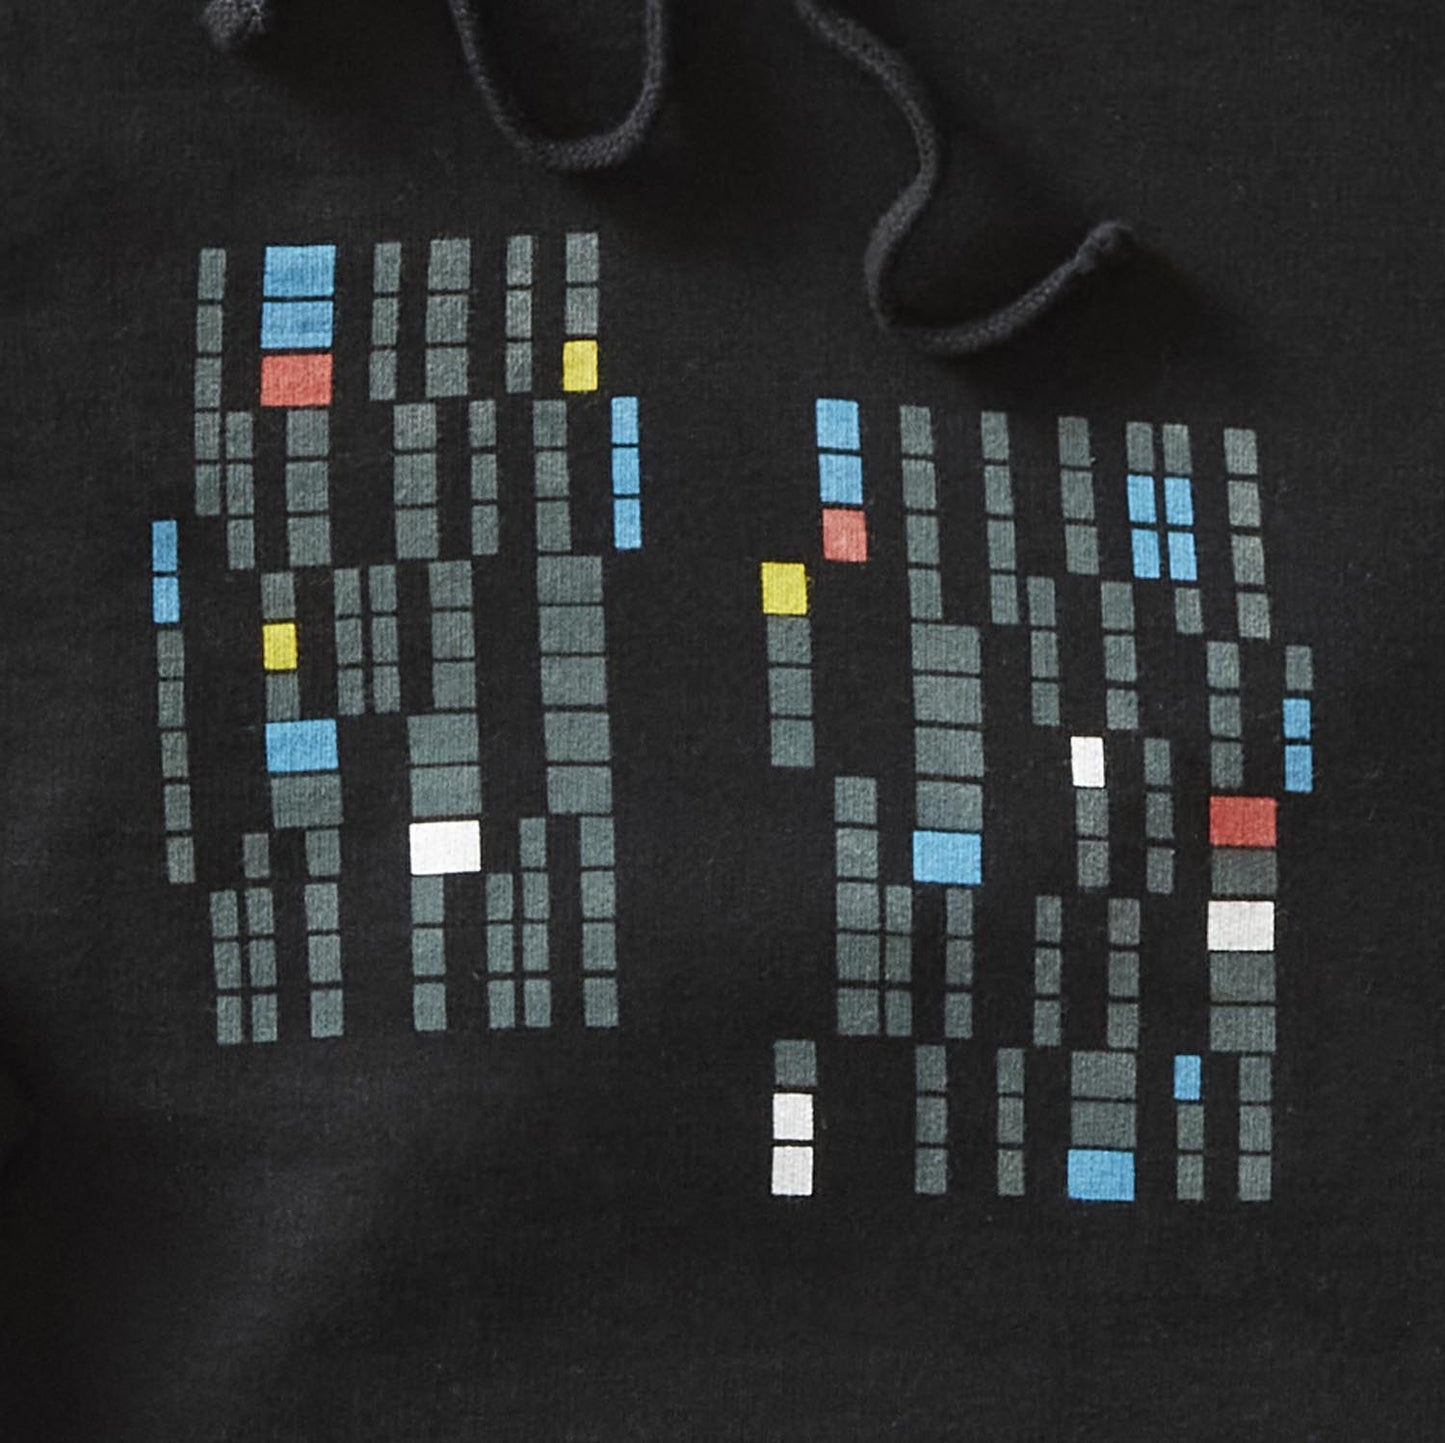 Detailed image of black pullover hoodie with rectangles in a variety of colors. minnesota, twin cities, minneapolis, st paul, minneapolis architecture, modern architecture, brutalism, cedar riverside plaza, minnesota-themed clothing, clothing, apparel, accessories, gifts, goods, hooded sweatshirt, hoodie, sweatshirts, hoodies